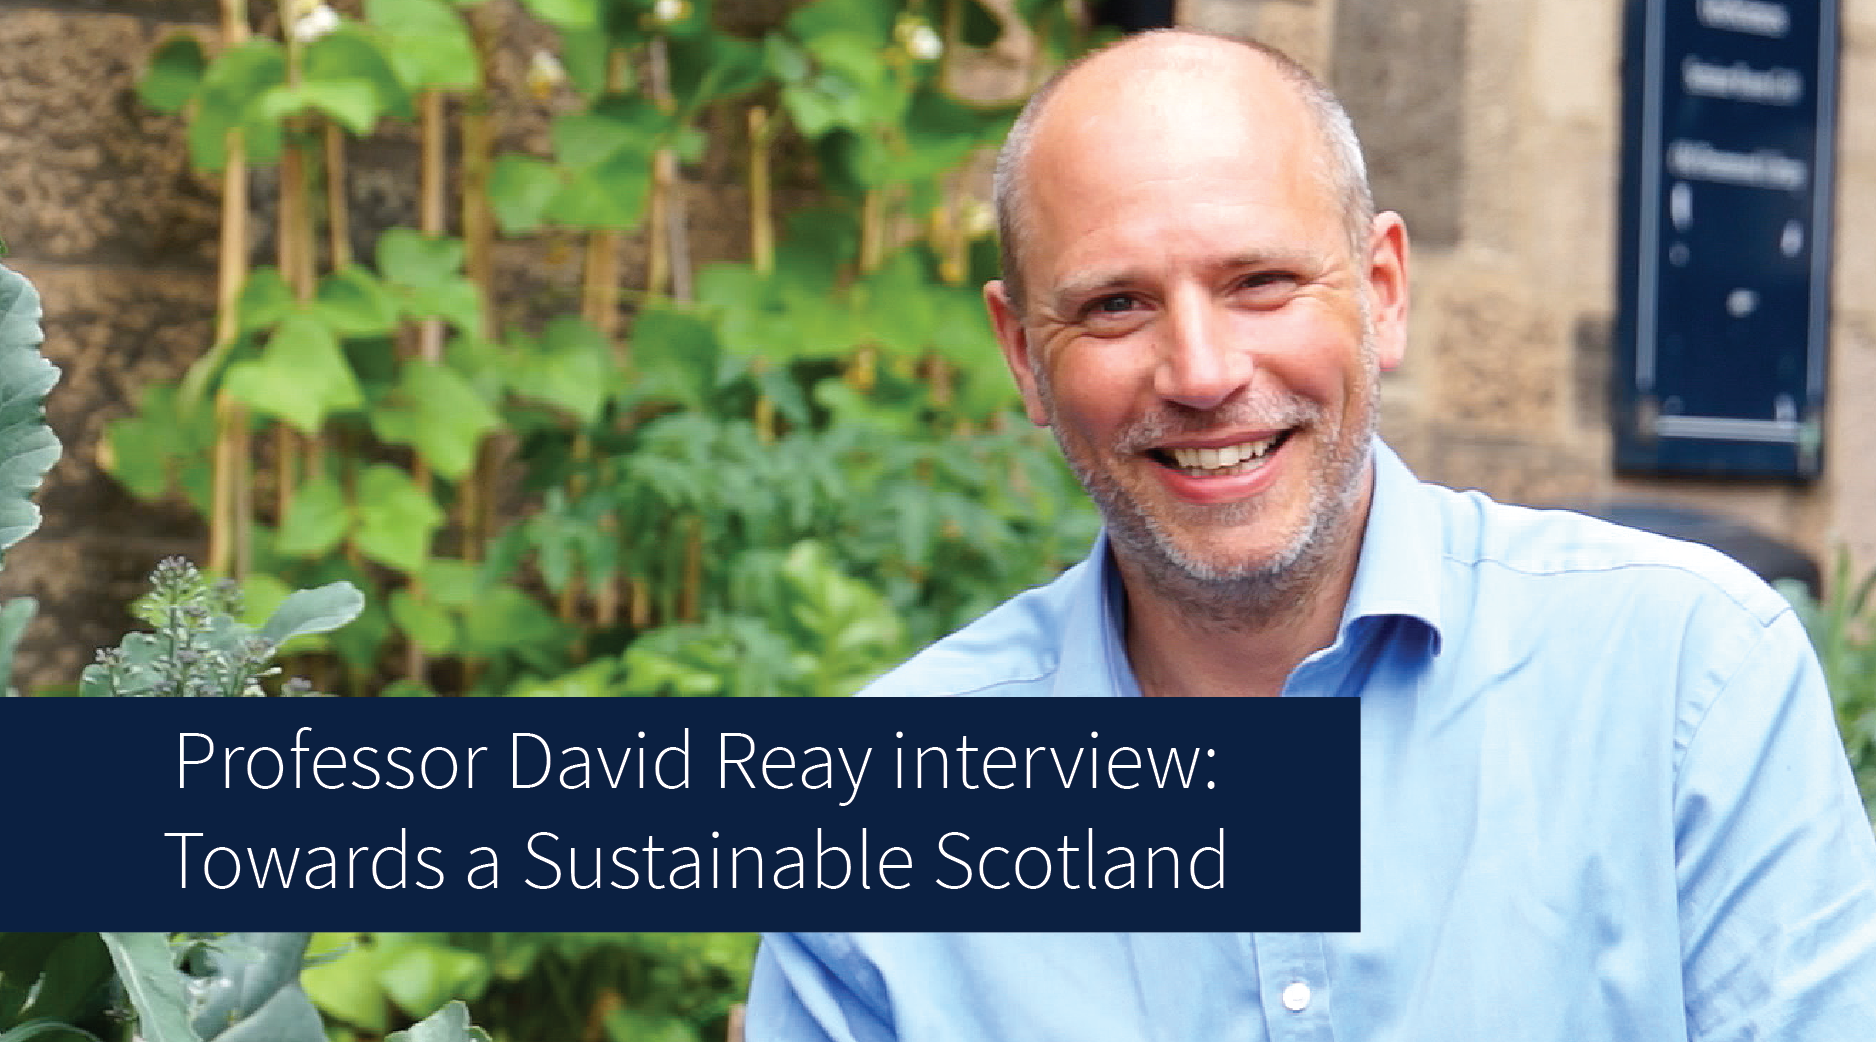 Professor David Reay interview: Towards a Sustainable Scotland